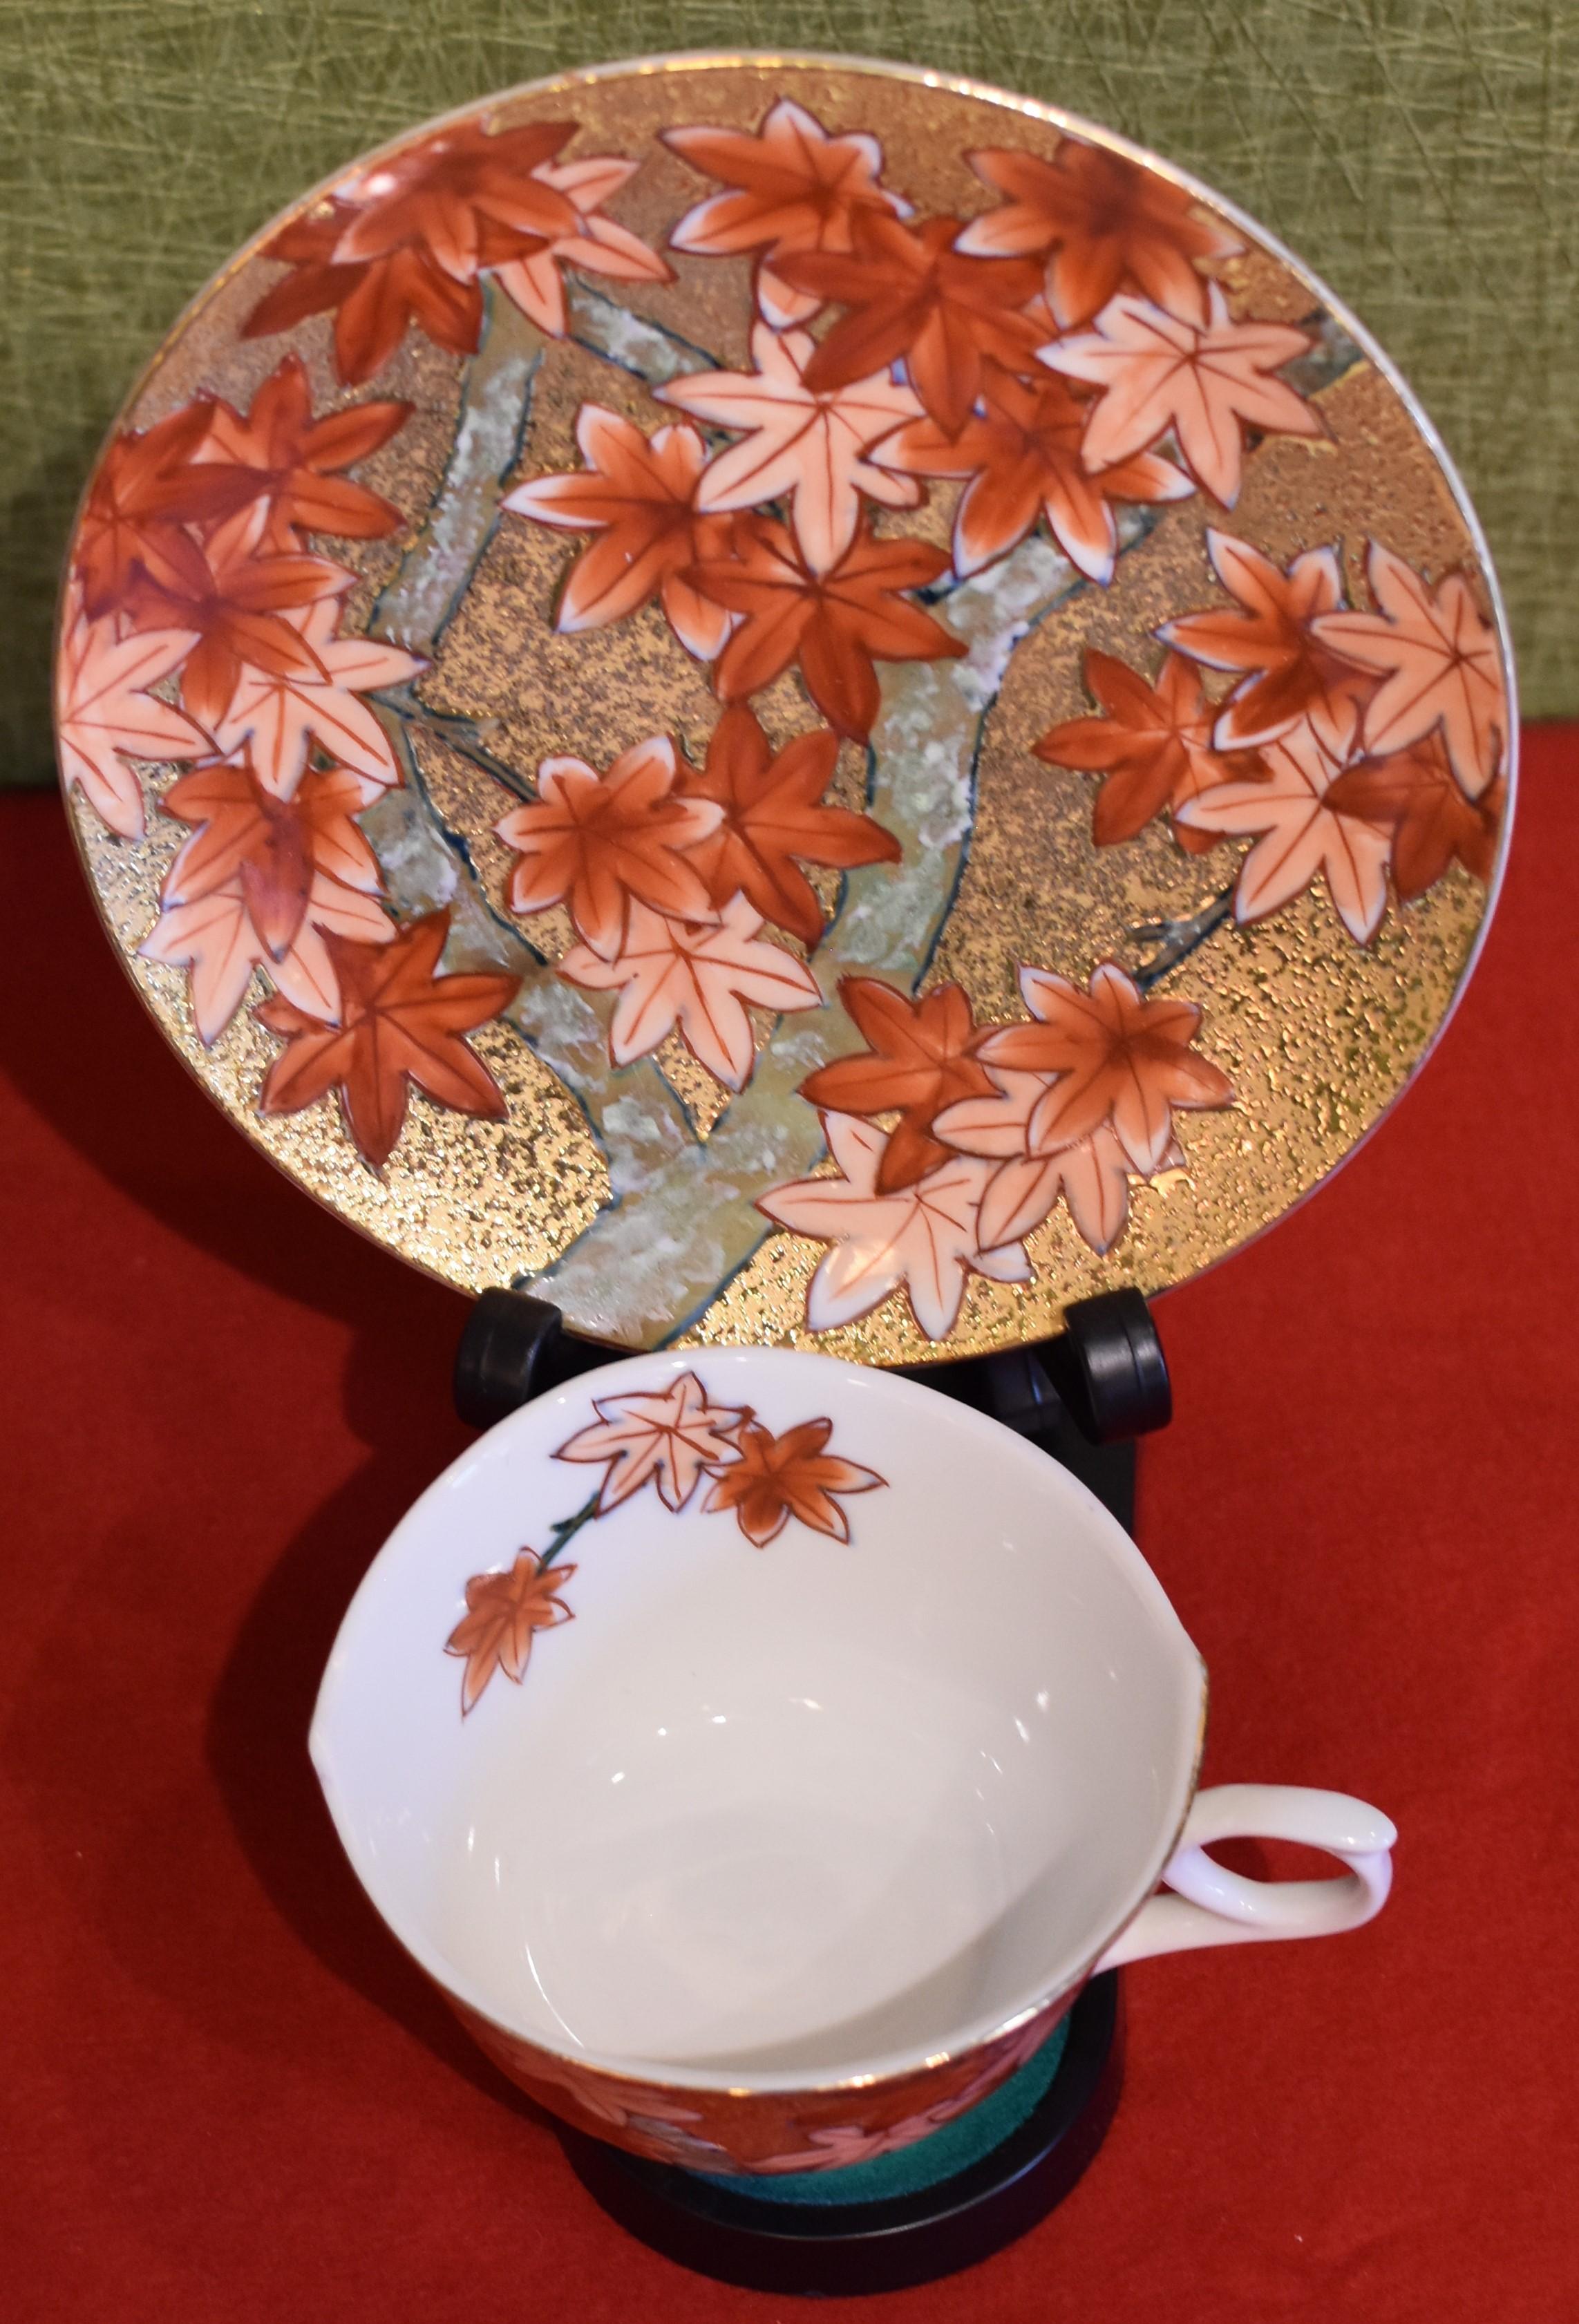 Unique contemporary gilded fine porcelain cup and saucer, intricately hand-painted in iron-red and peach on an attractive gilded body, featuring autumn maple leaves.
This cup and saucer is from a signature series by a highly acclaimed award-winning